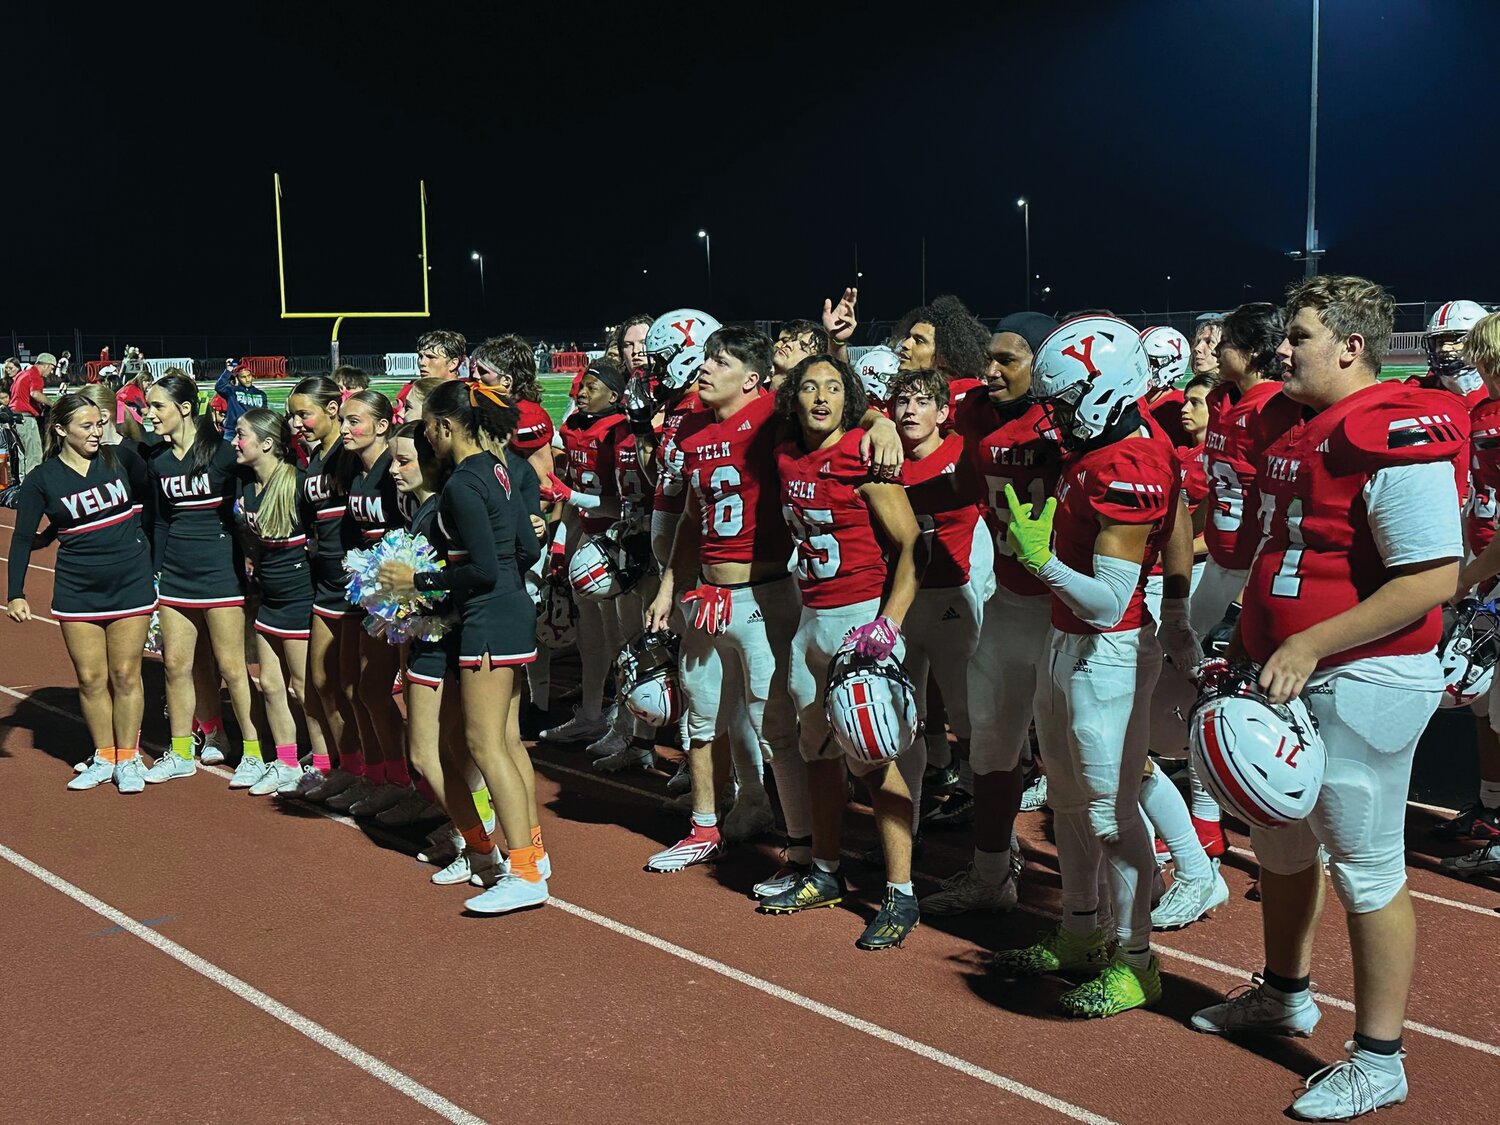 Members of the Yelm football and cheerleading teams join together to sing “Take Me Home, Country Roads” after the football team defeated River Ridge, 59-7.